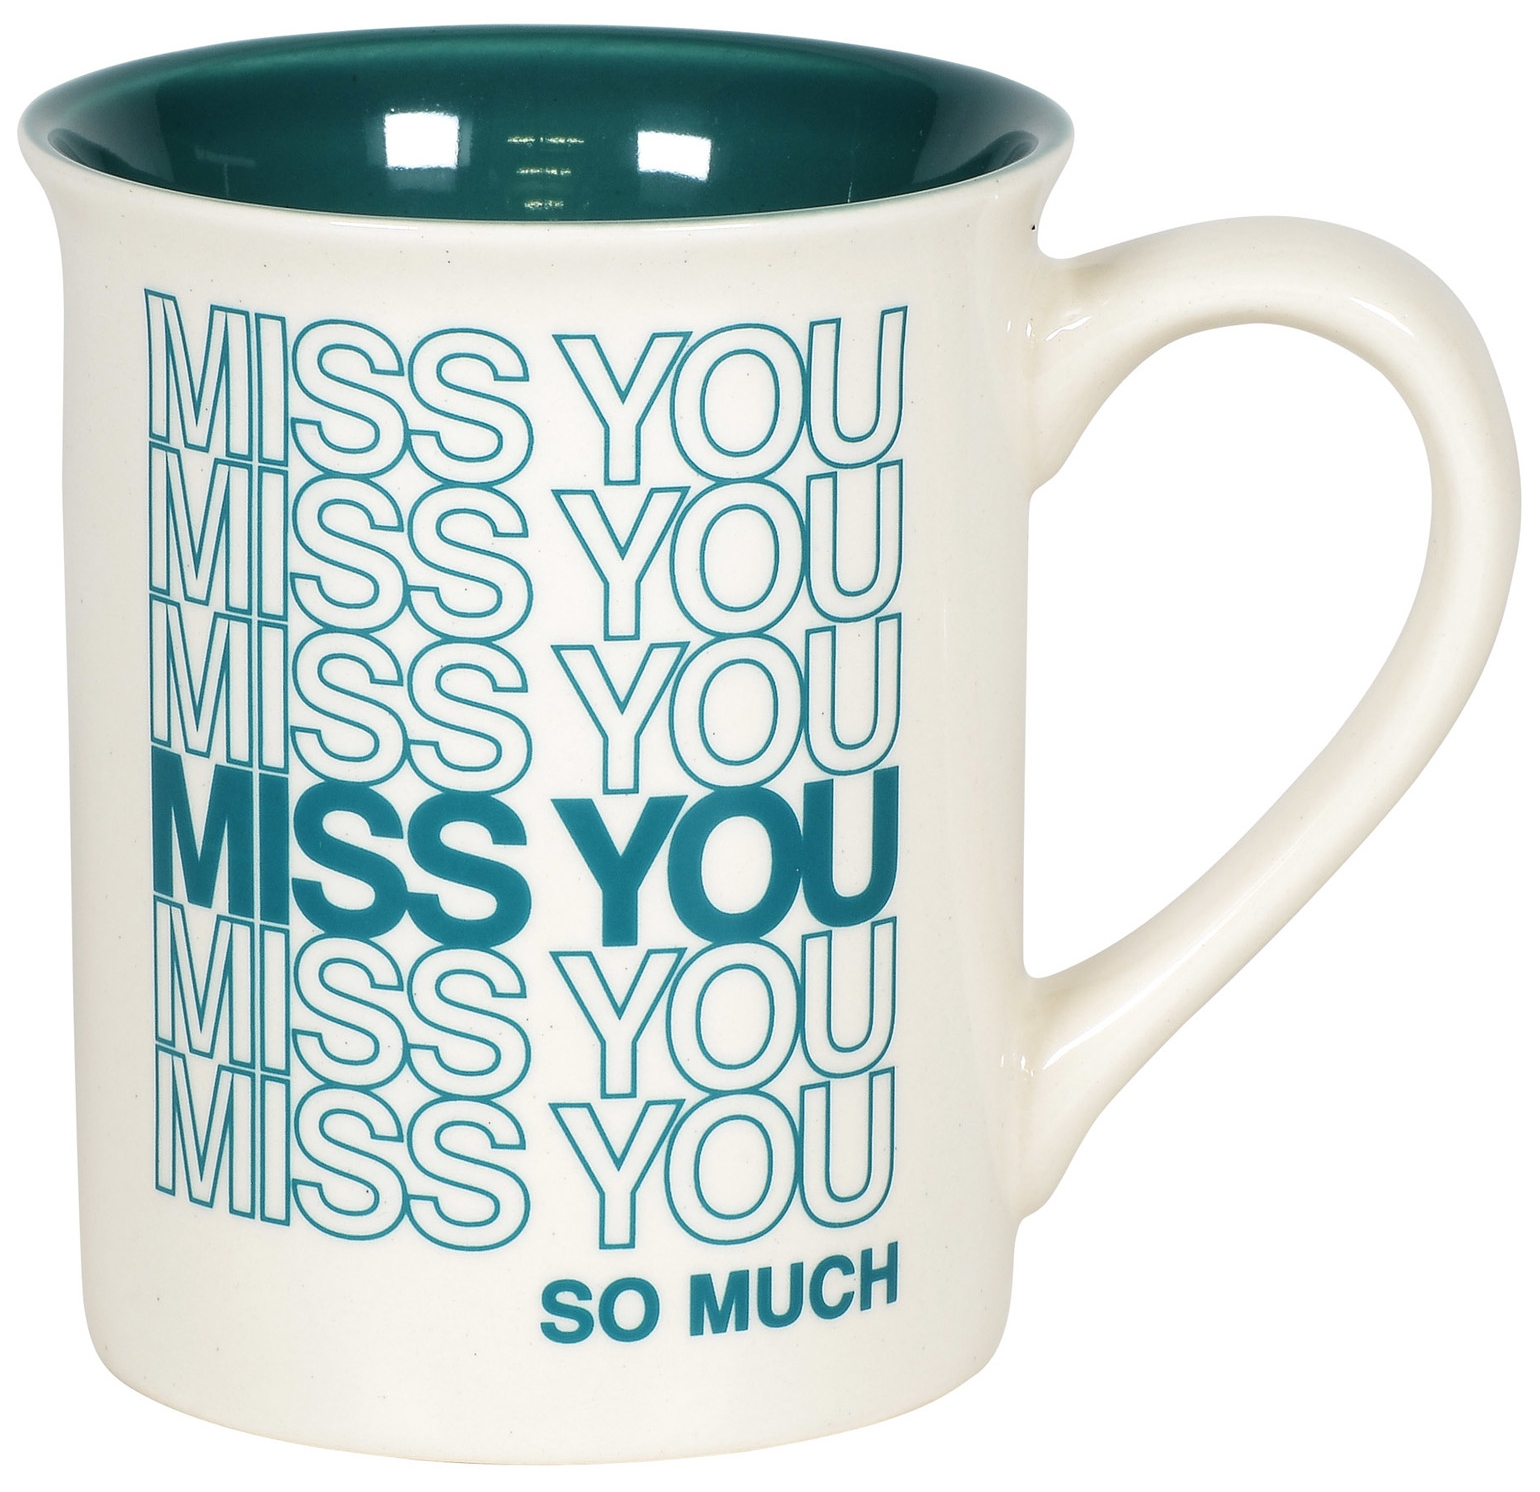 Our Name Is Mud 6006215 Miss You Mug Set of 2